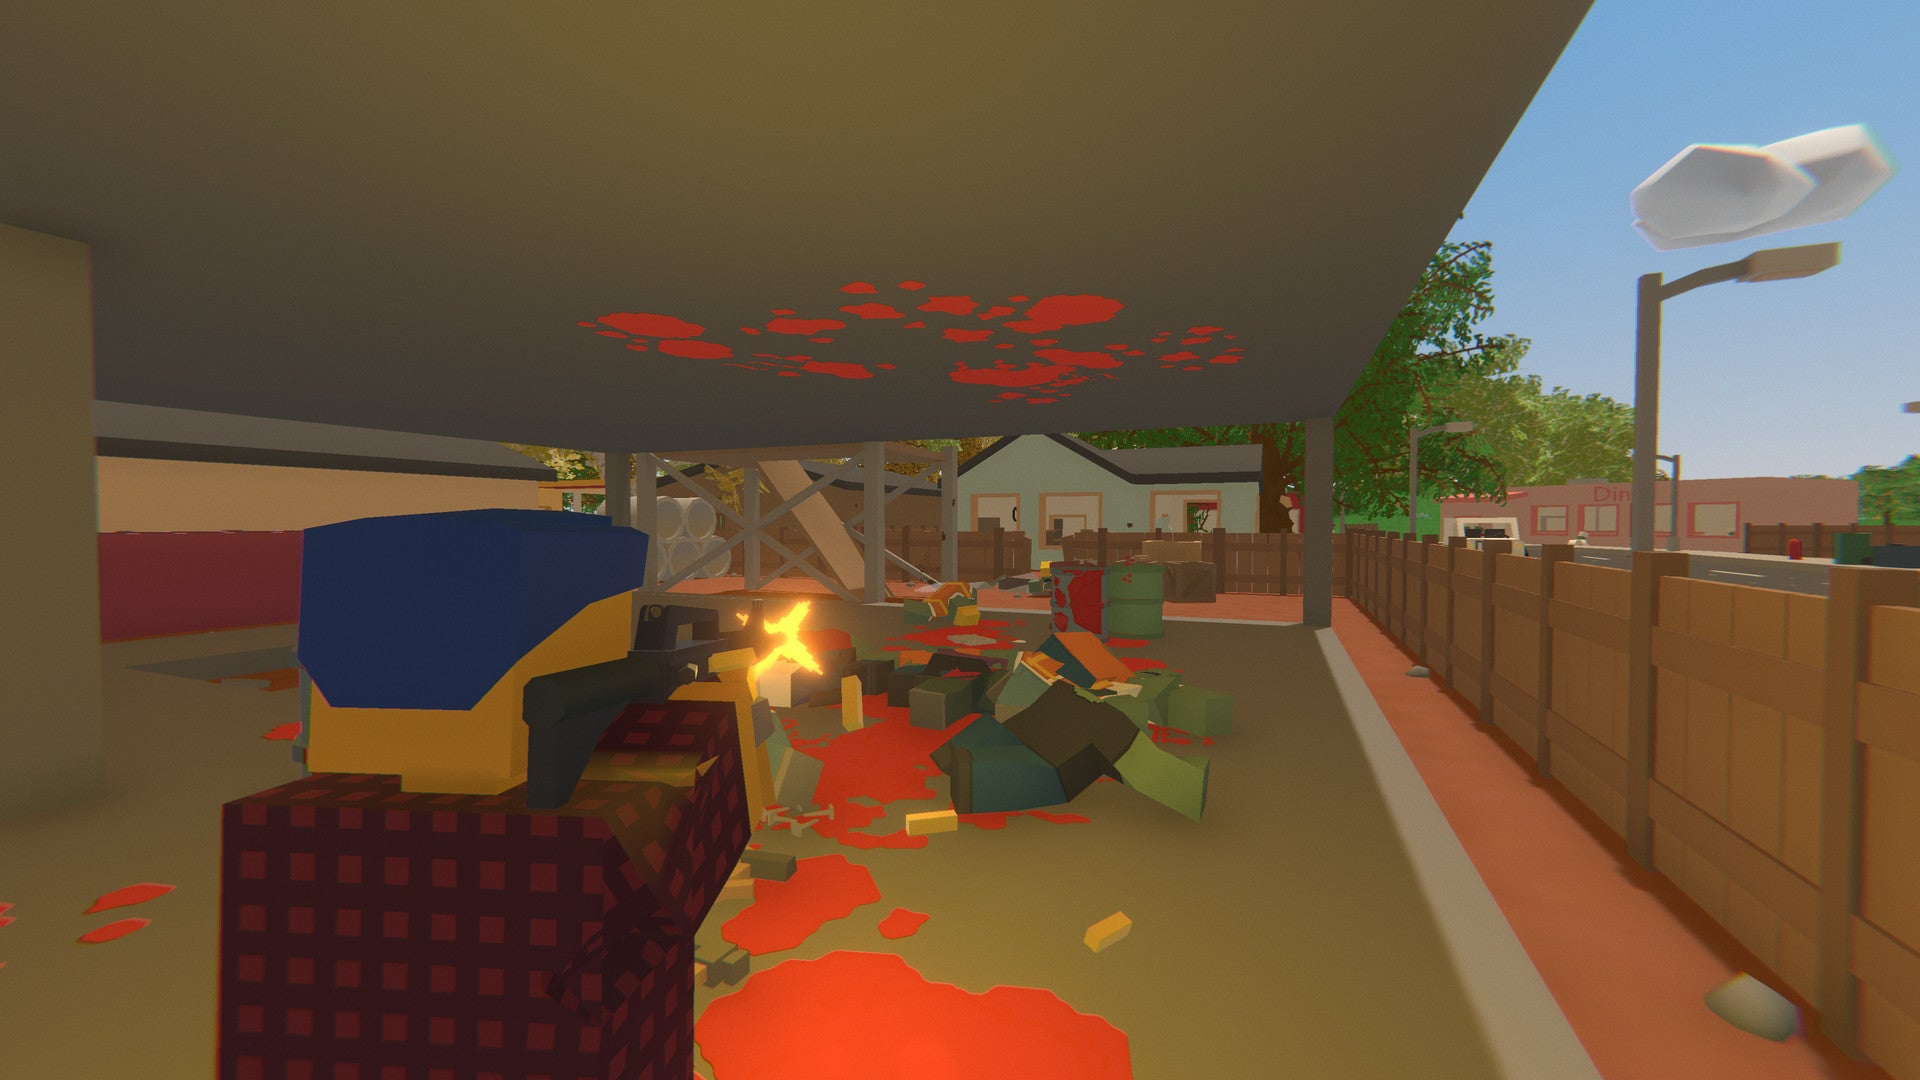 Unturned Cheats - IDs for Weapons, Animals, How Do You Enable Cheats? | VG247